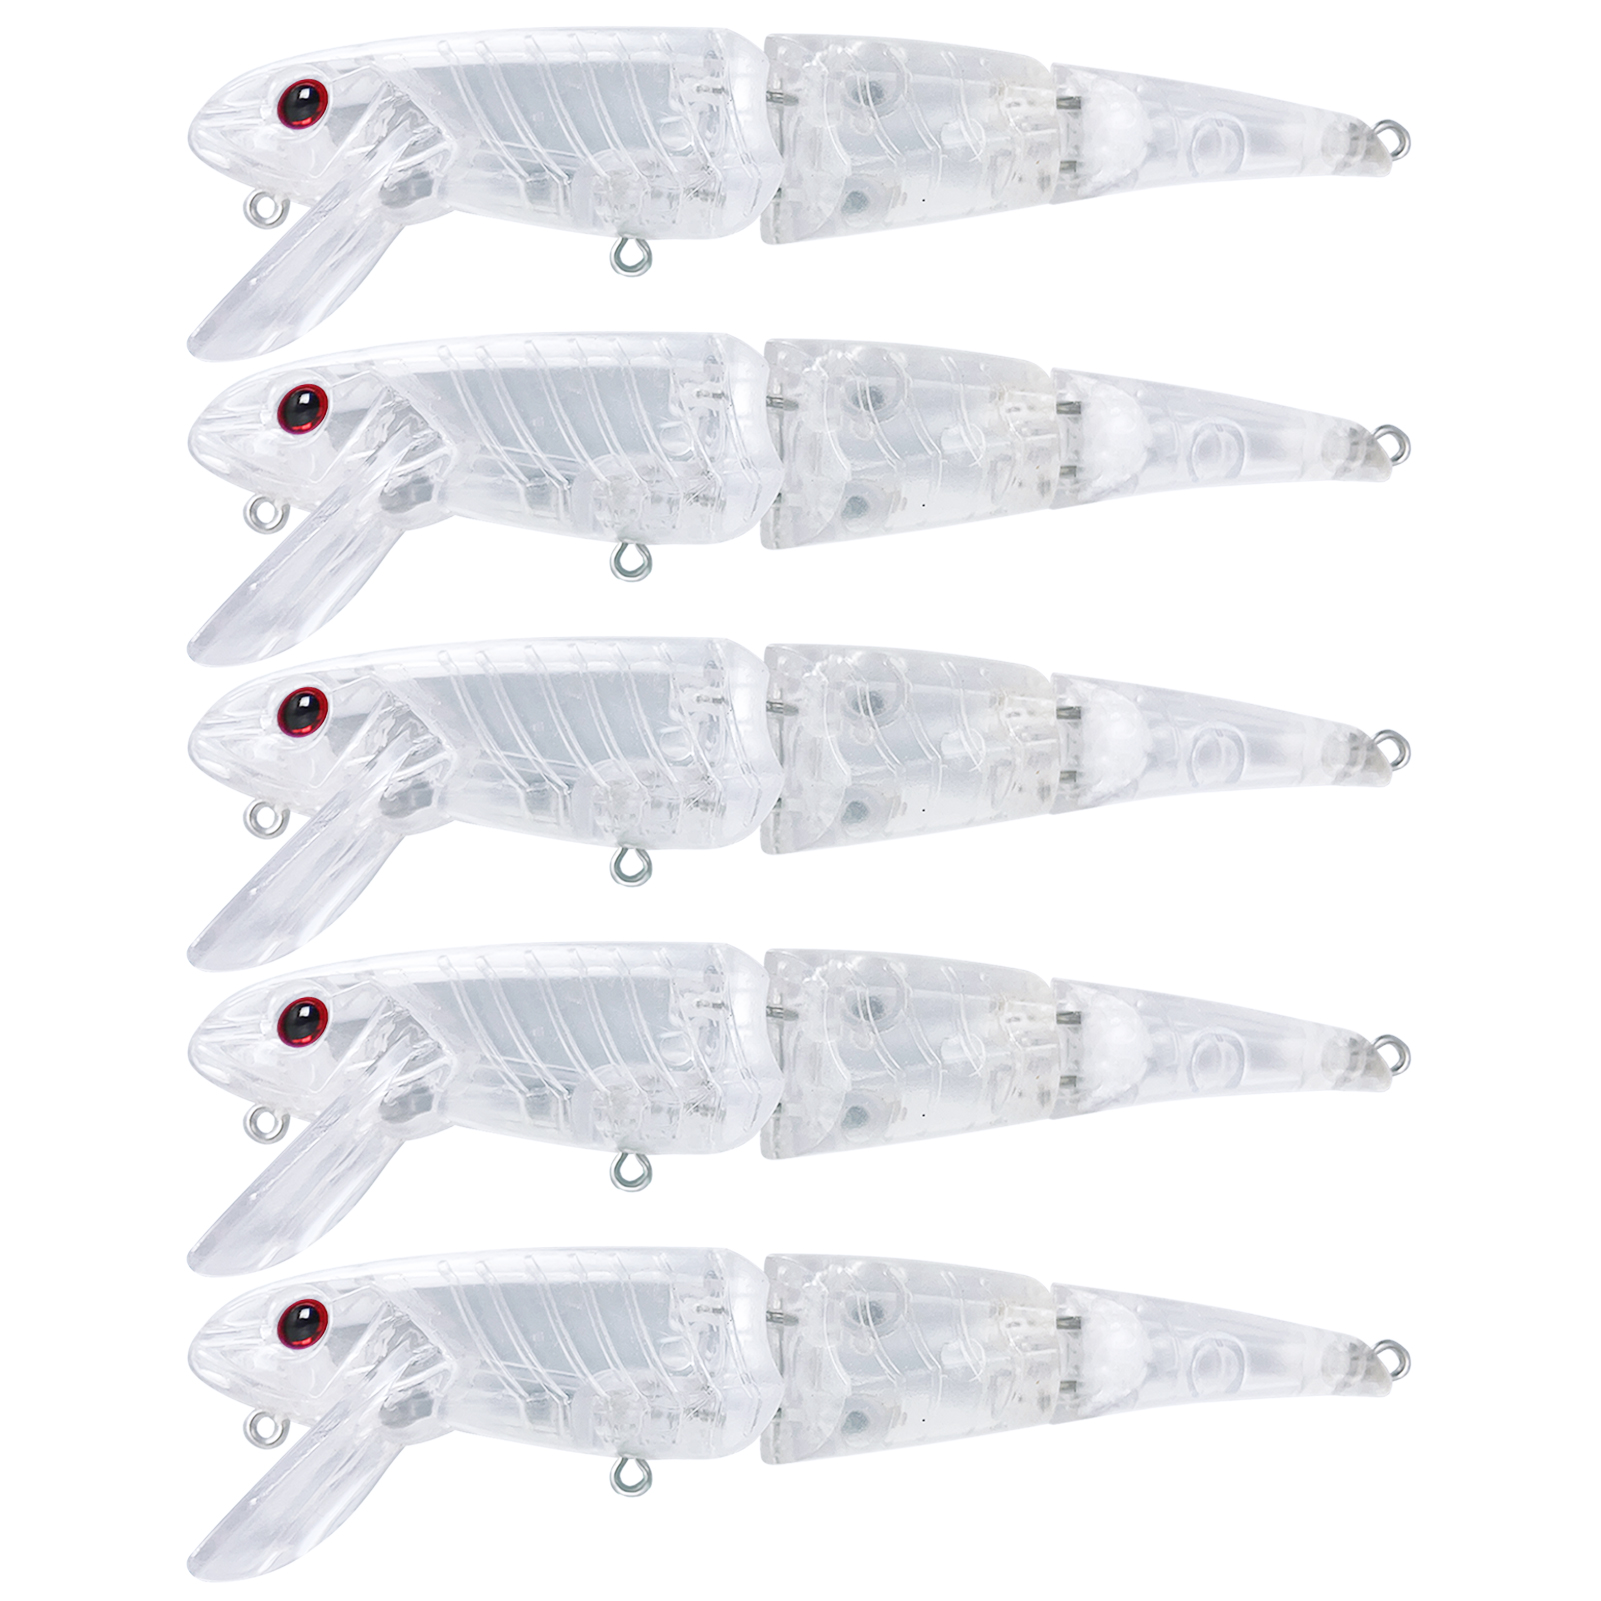 FREE FISHER 15pcs Unpainted Lures Set 3-Section Clear Blank Bait Embryo 11cm 16g DIY Topwater Swimbait Joint Baits